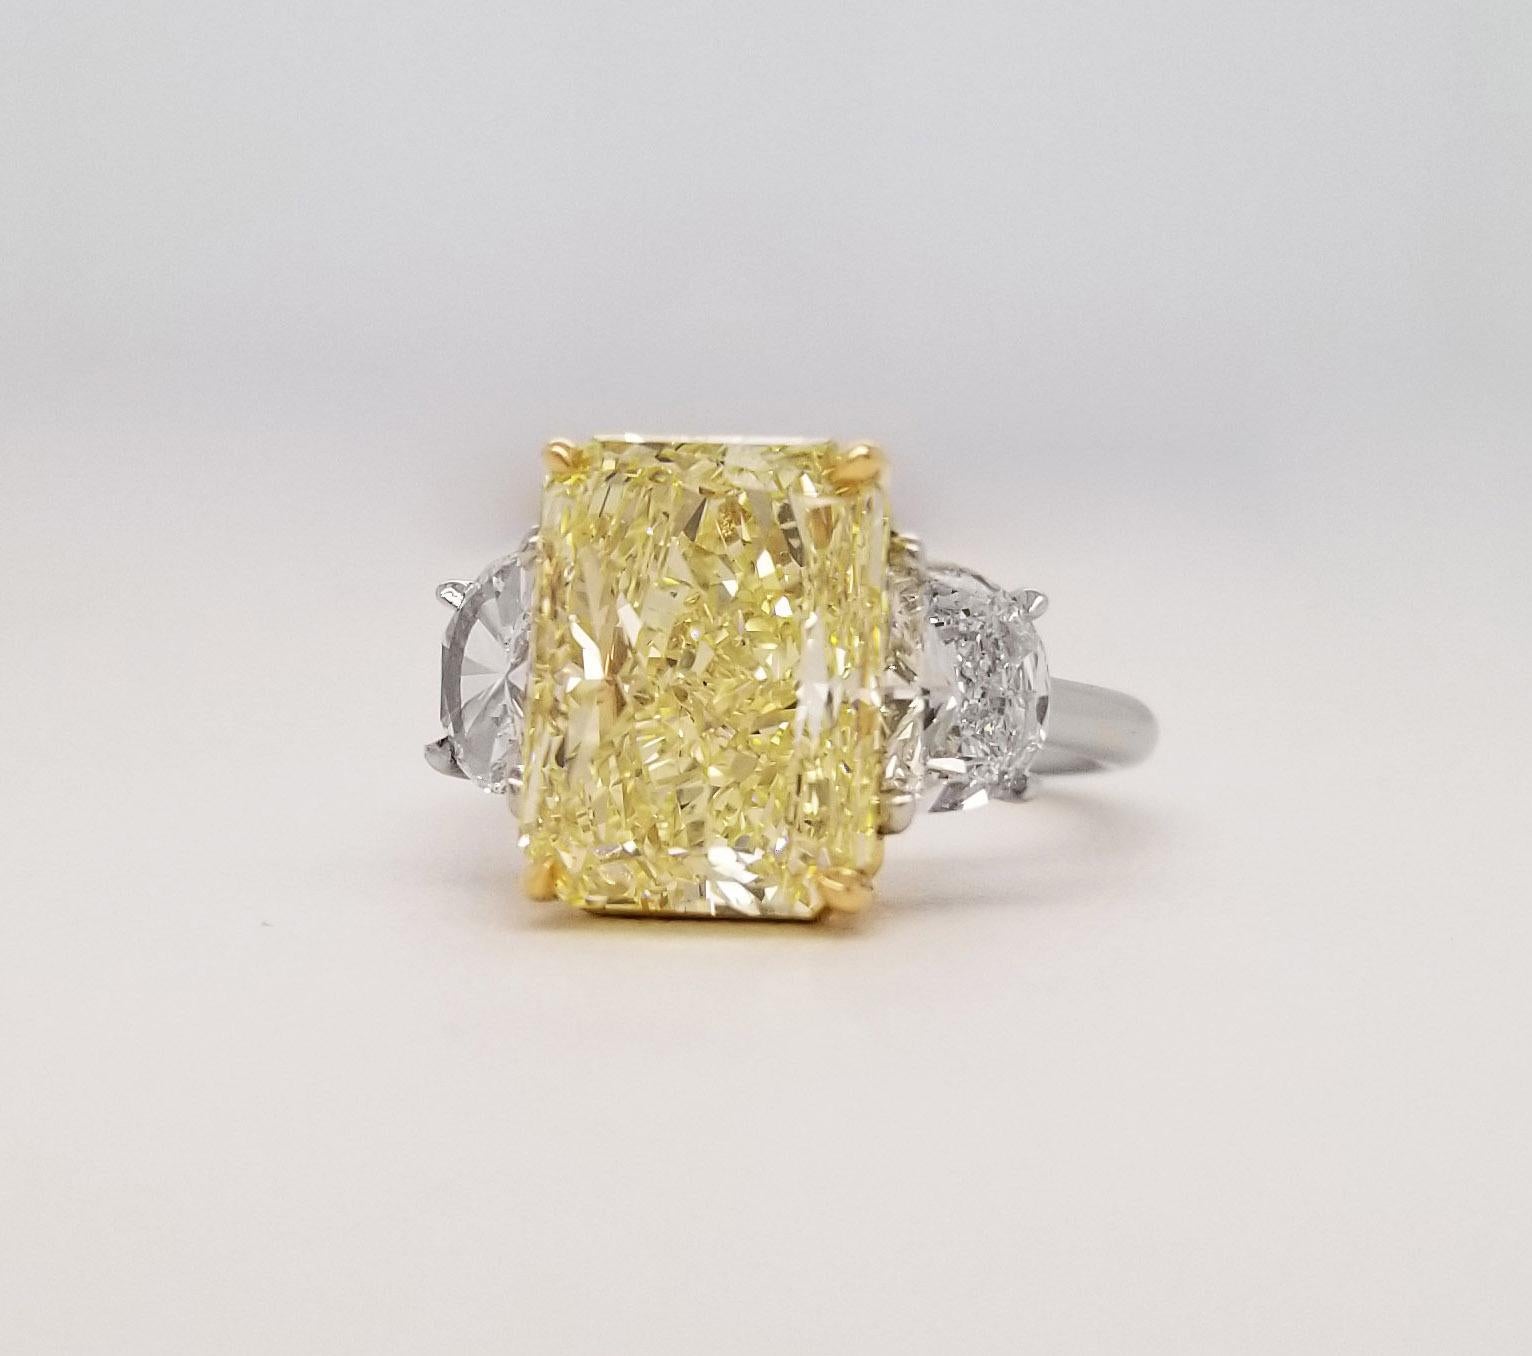 Scarselli features a 6+ carat Fancy Yellow radiant diamond  flanked by a pair of half moons 1.01 total carat weight for a modern and tailored look. The center stone is certified by GIA (see certificate attached picture for more detailed stone